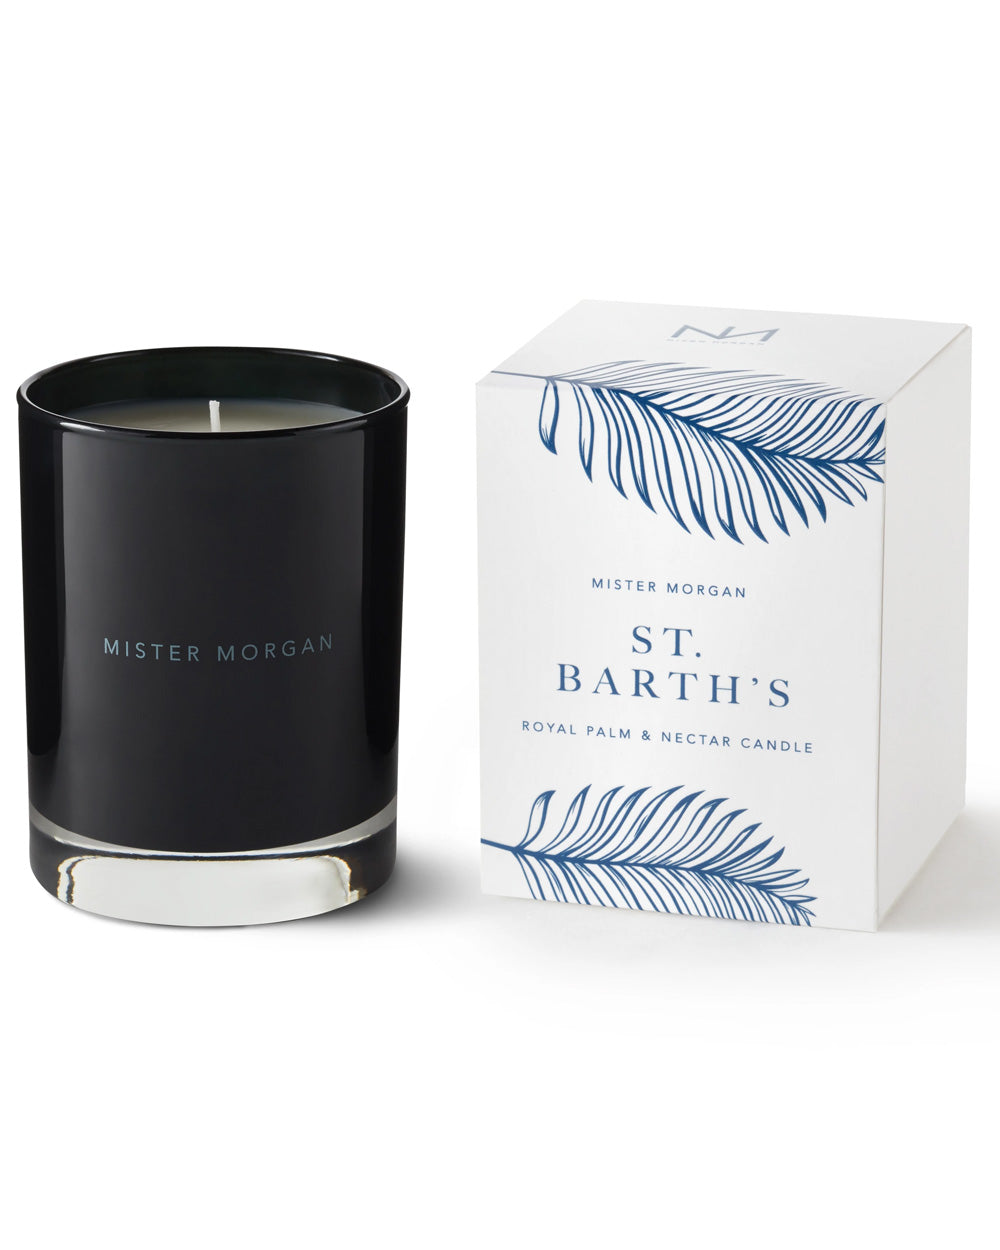 St Barths Royal Palm and Nectar Candle